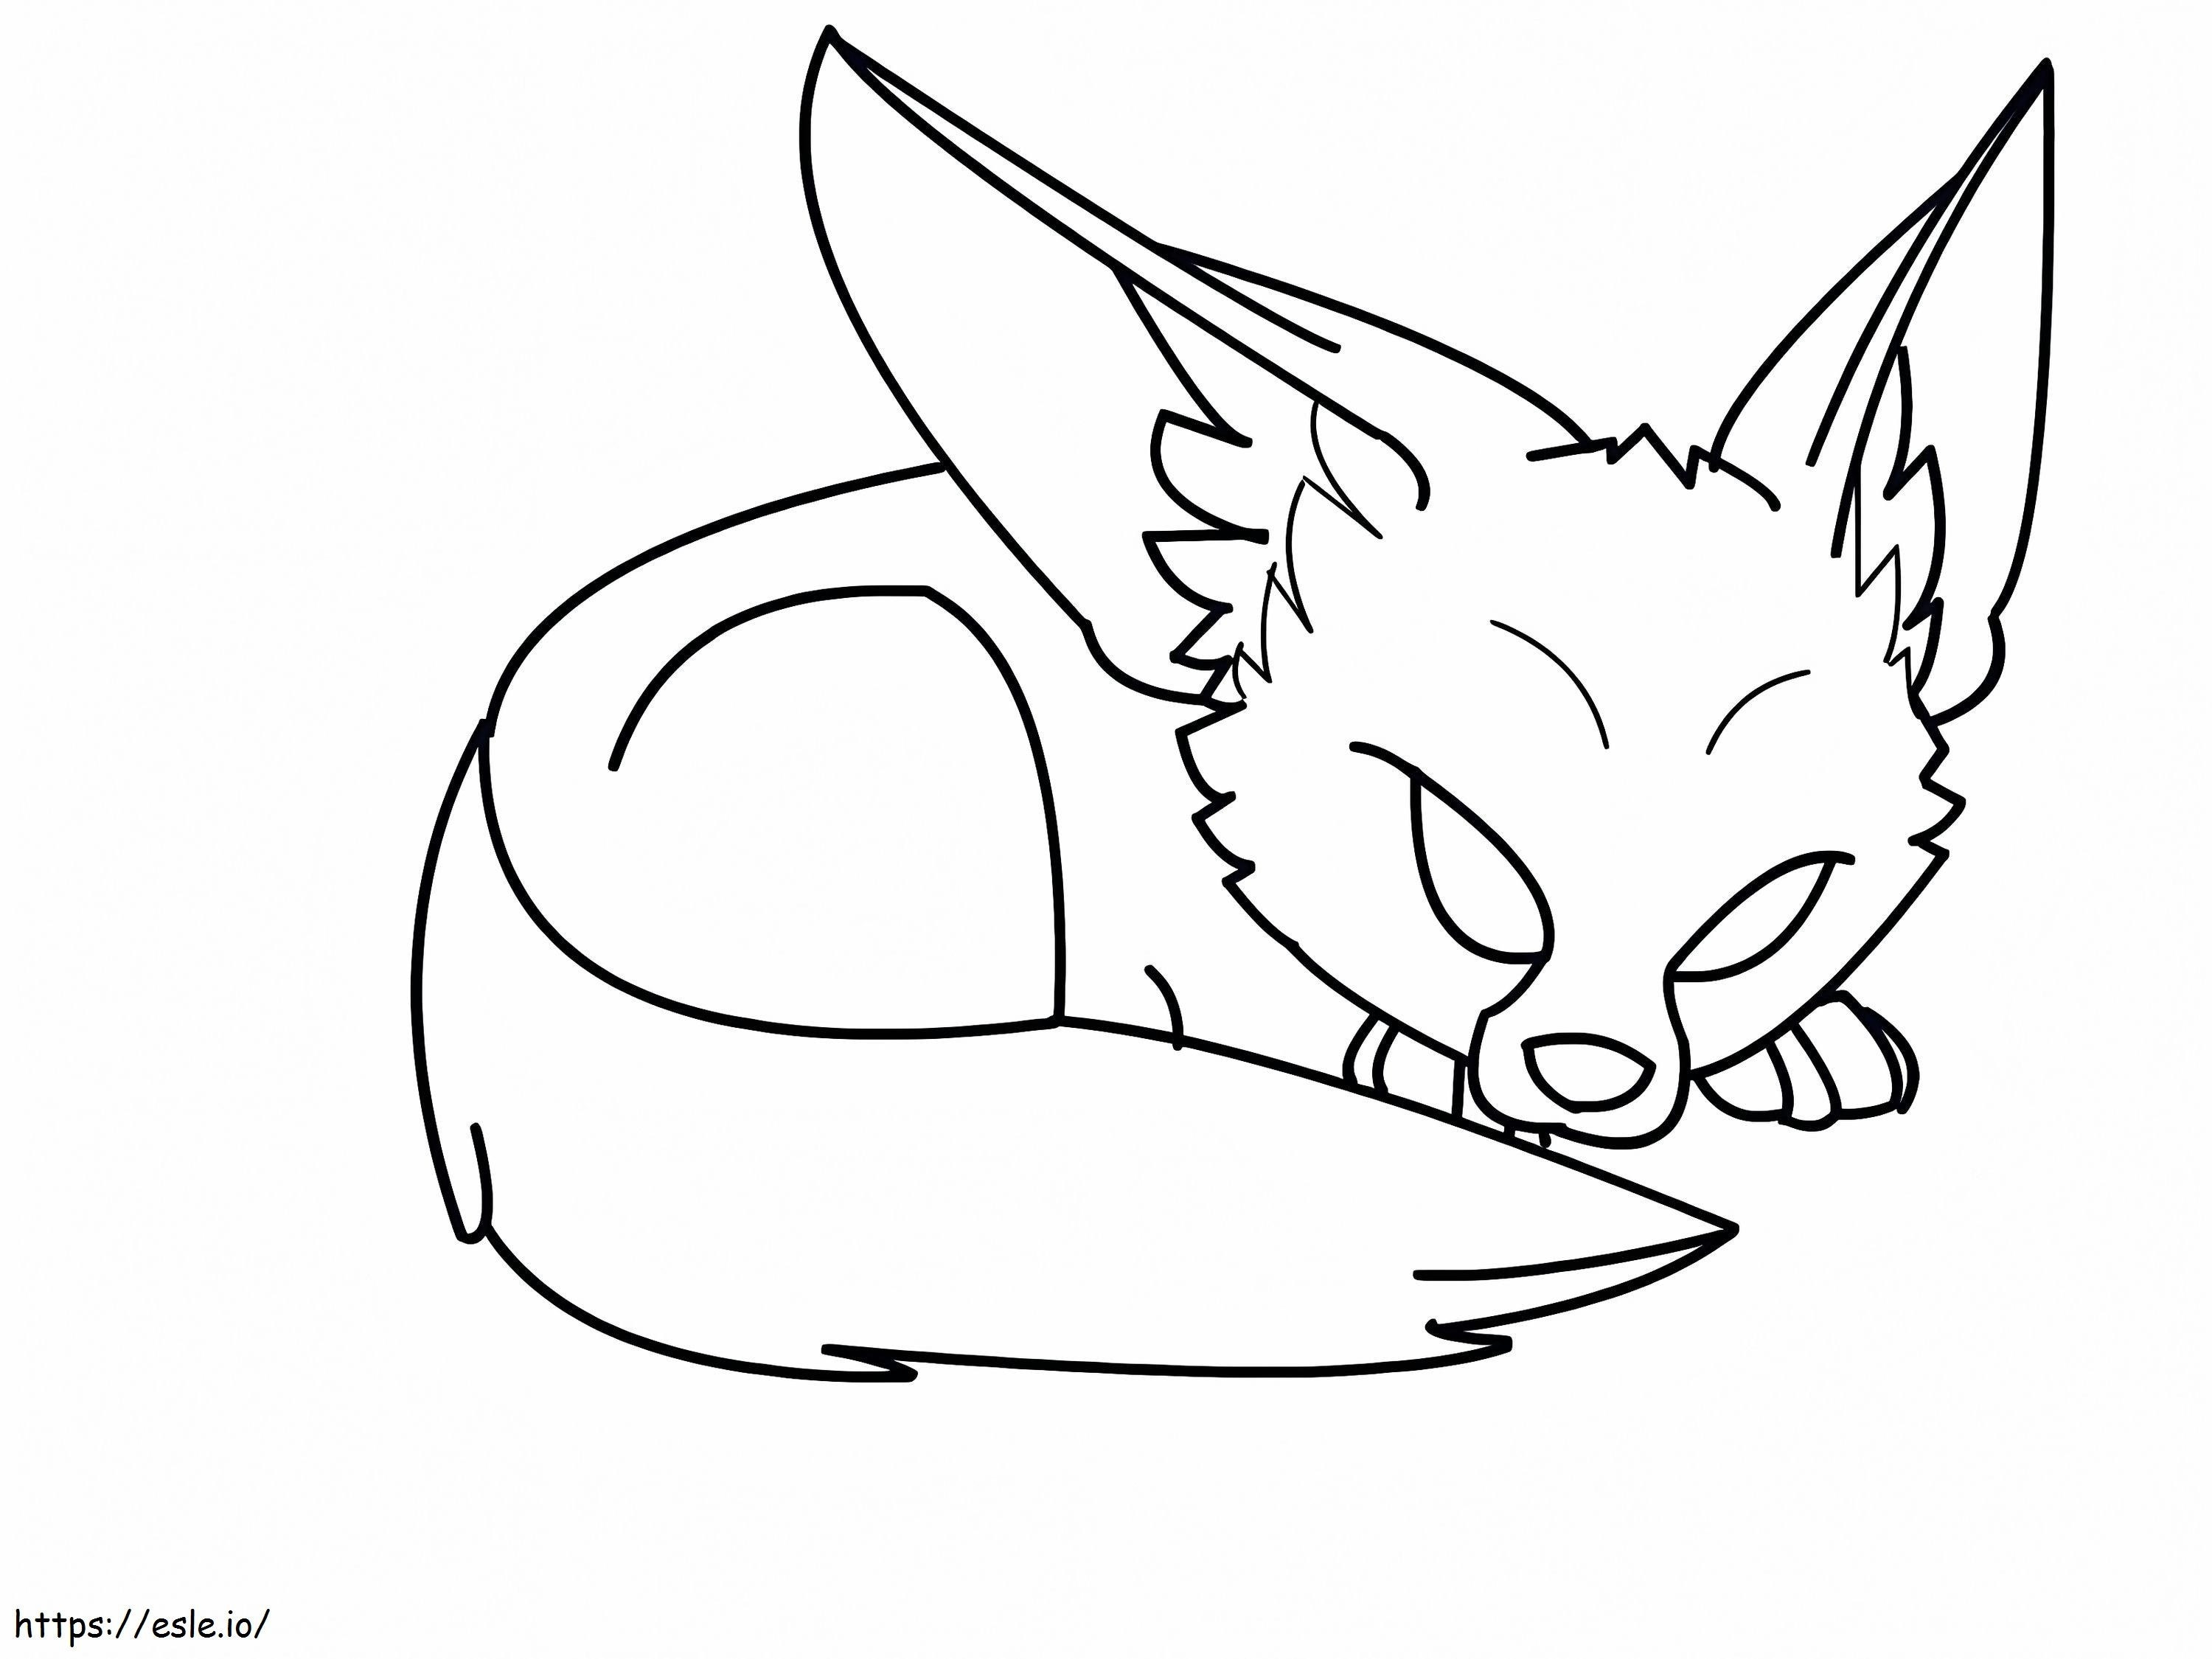 1529112740 Fna4 coloring page